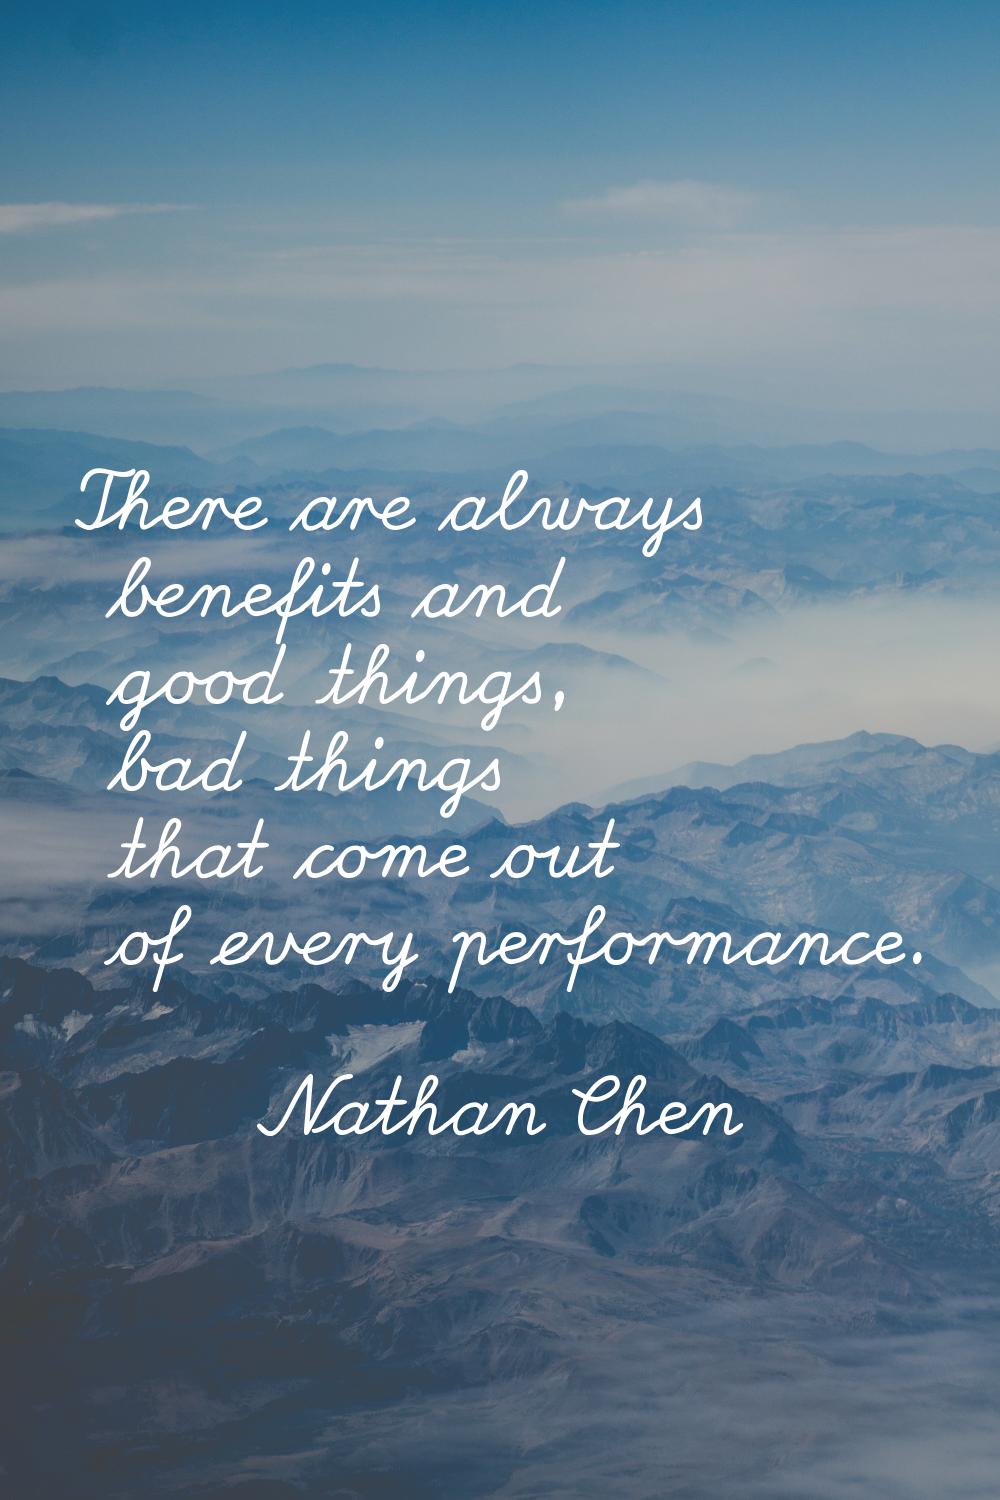 There are always benefits and good things, bad things that come out of every performance.